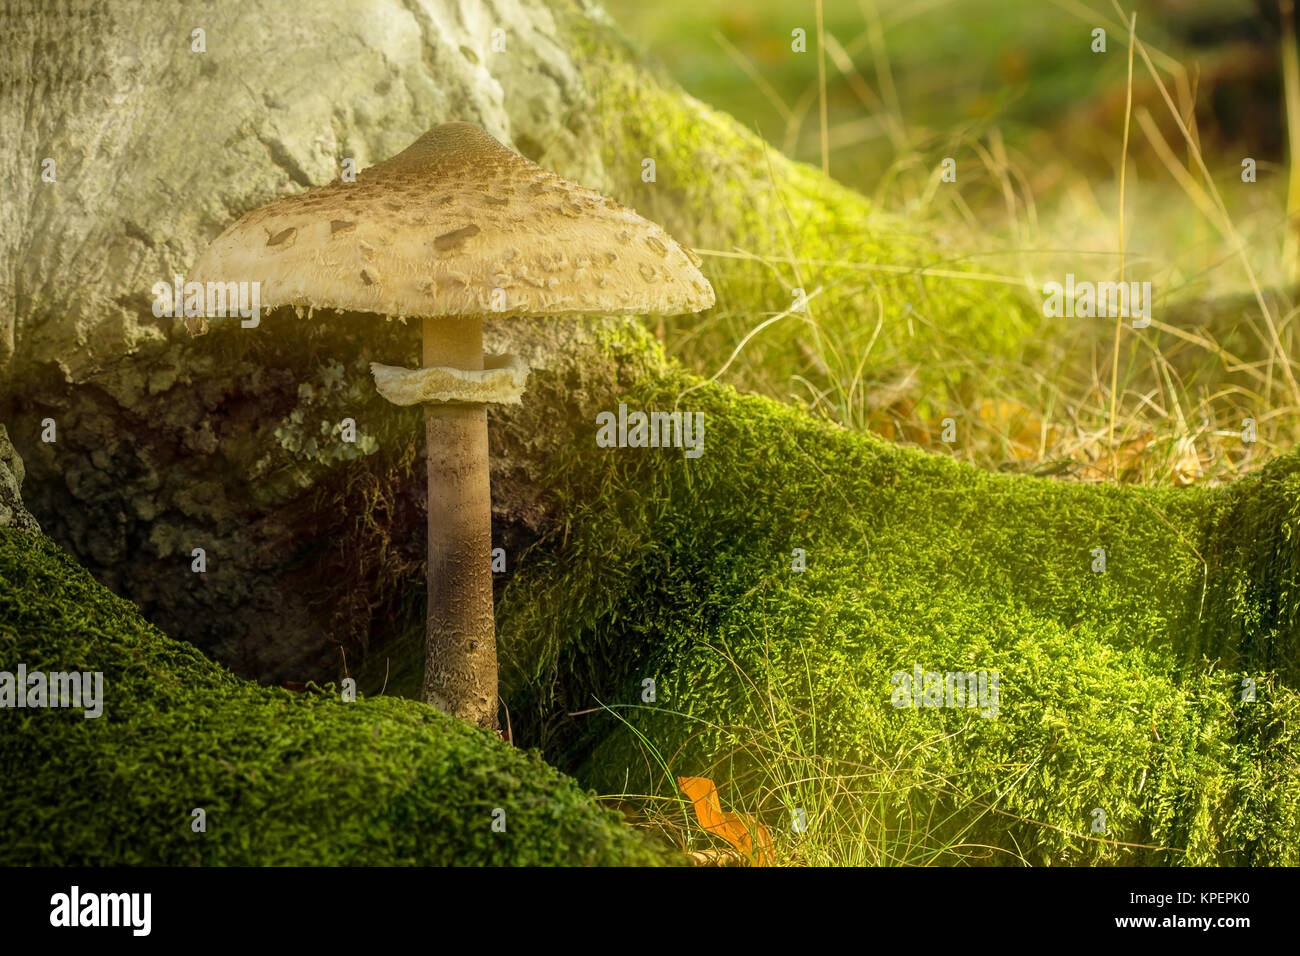 Parasol fungus and moss in the shade Stock Photo